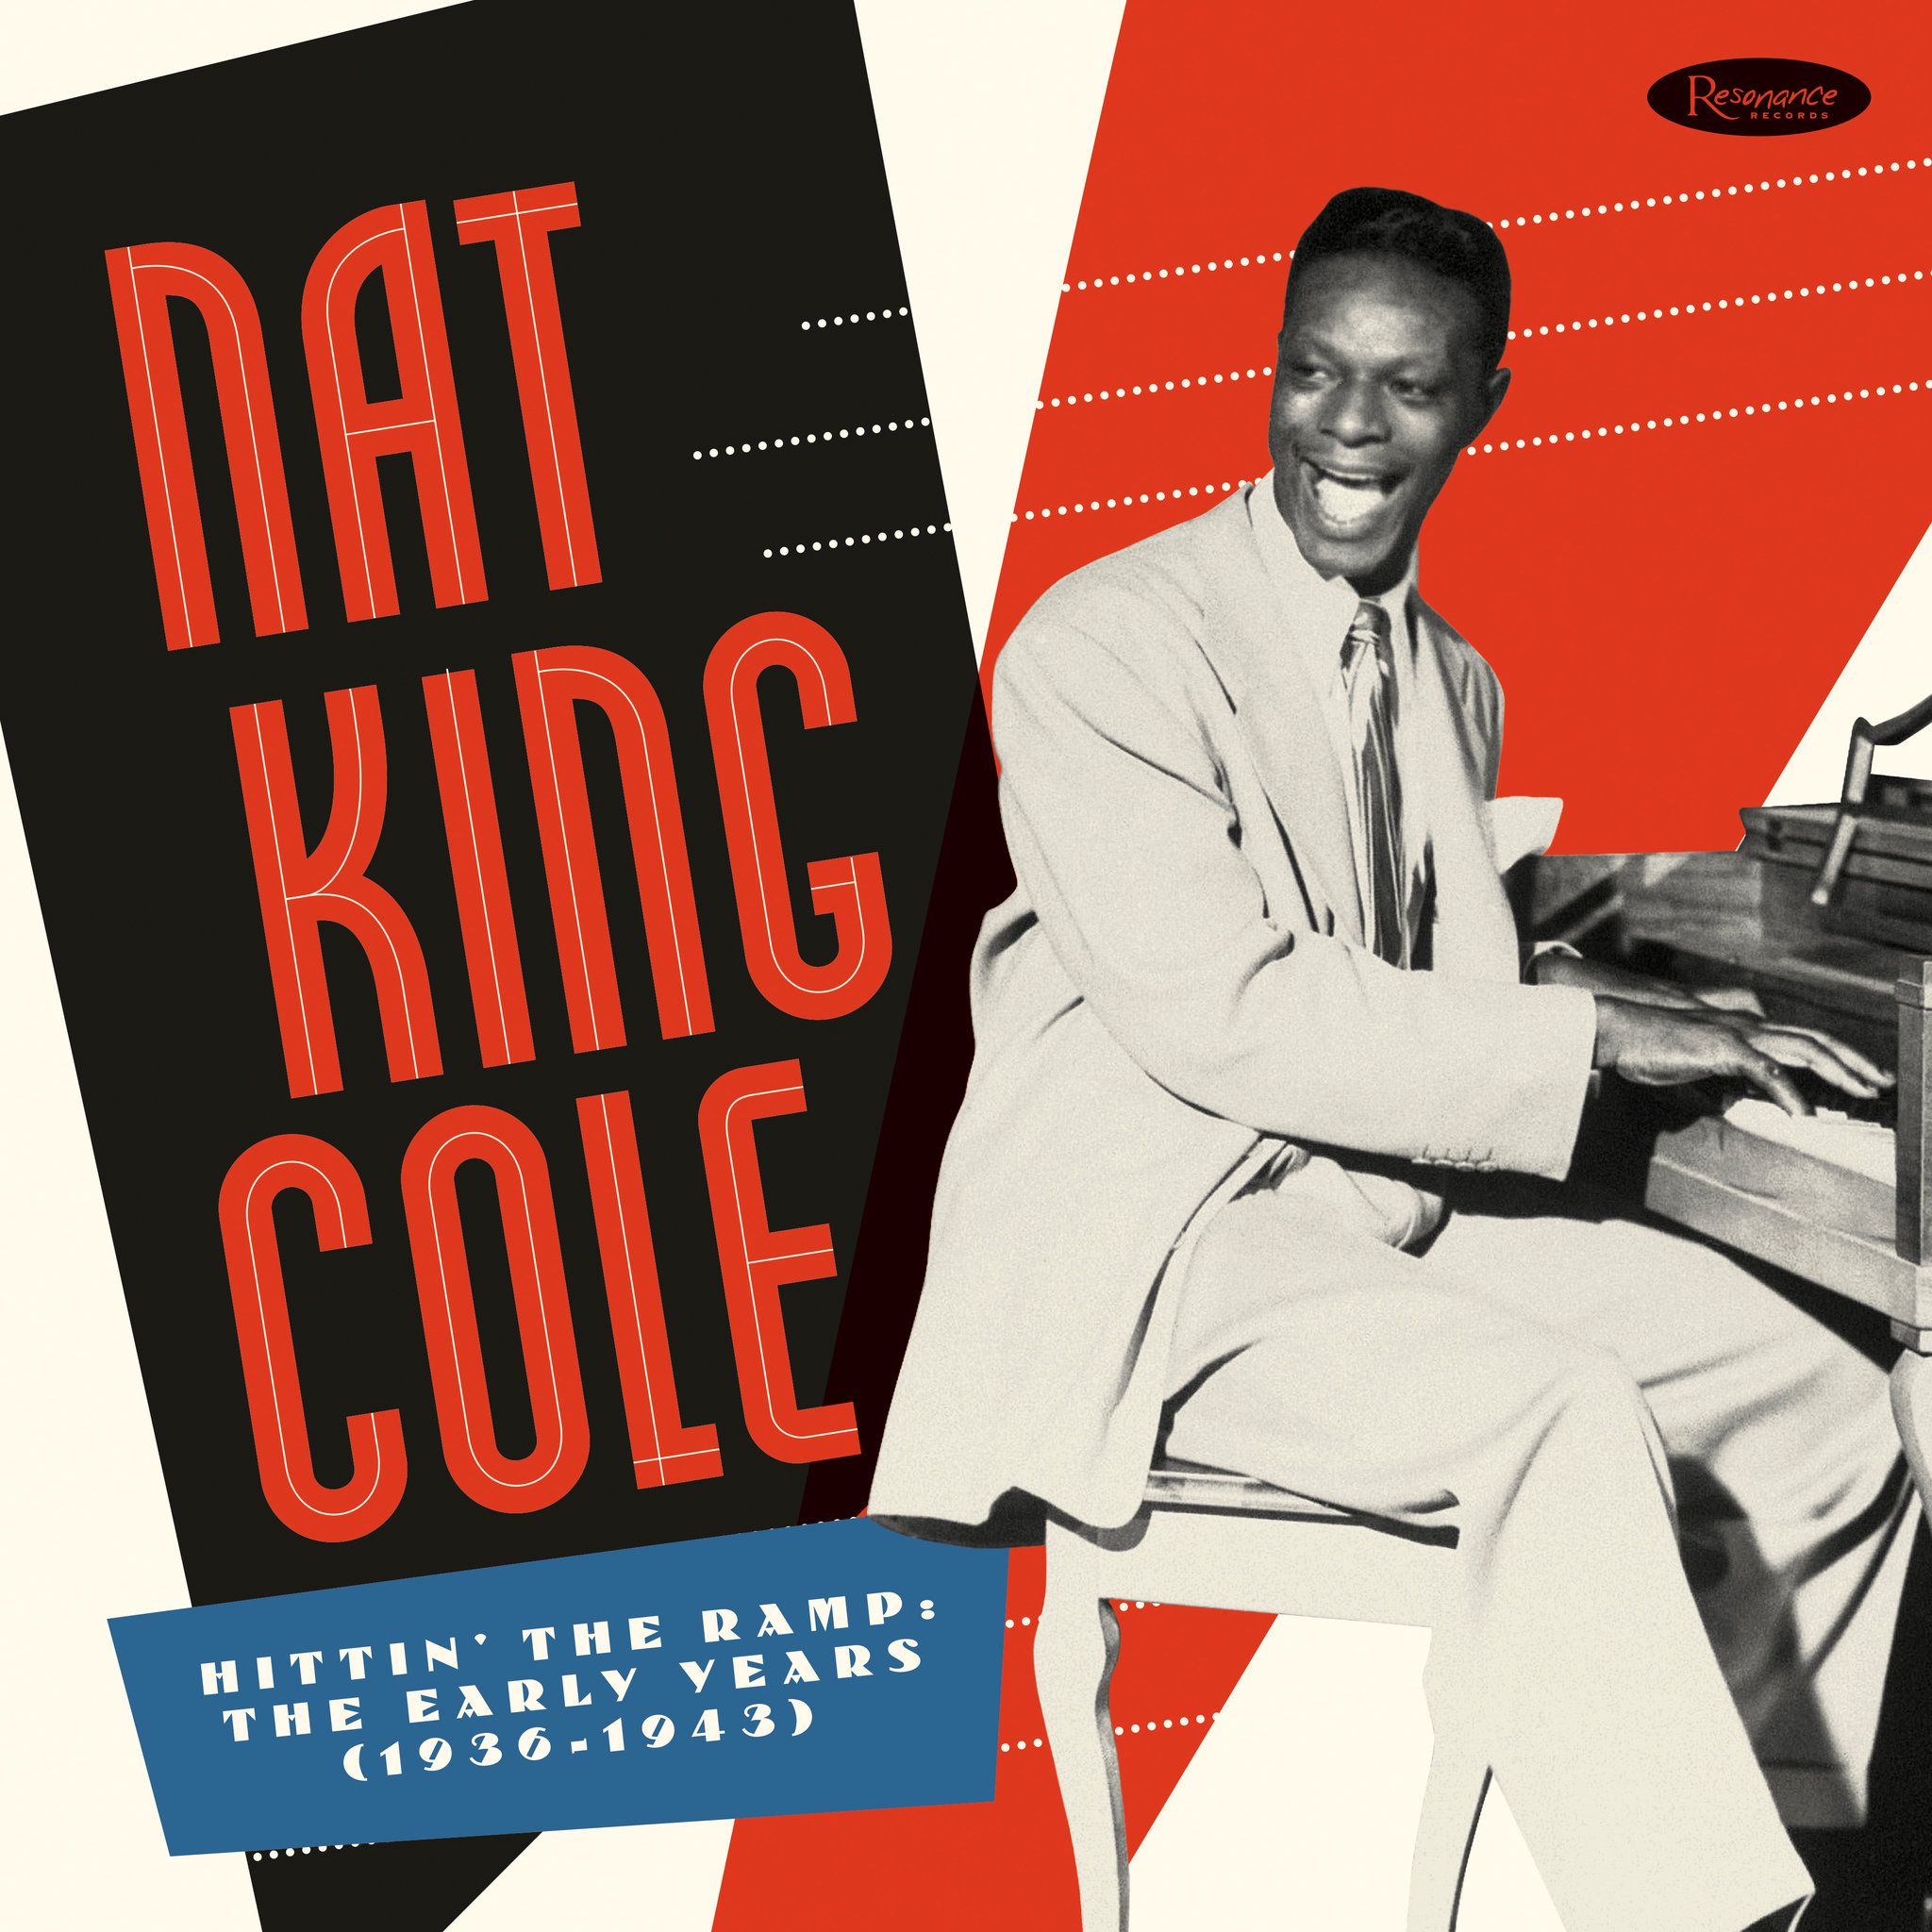 Nat King Cole's Early Years Are Getting the Archival Treatment